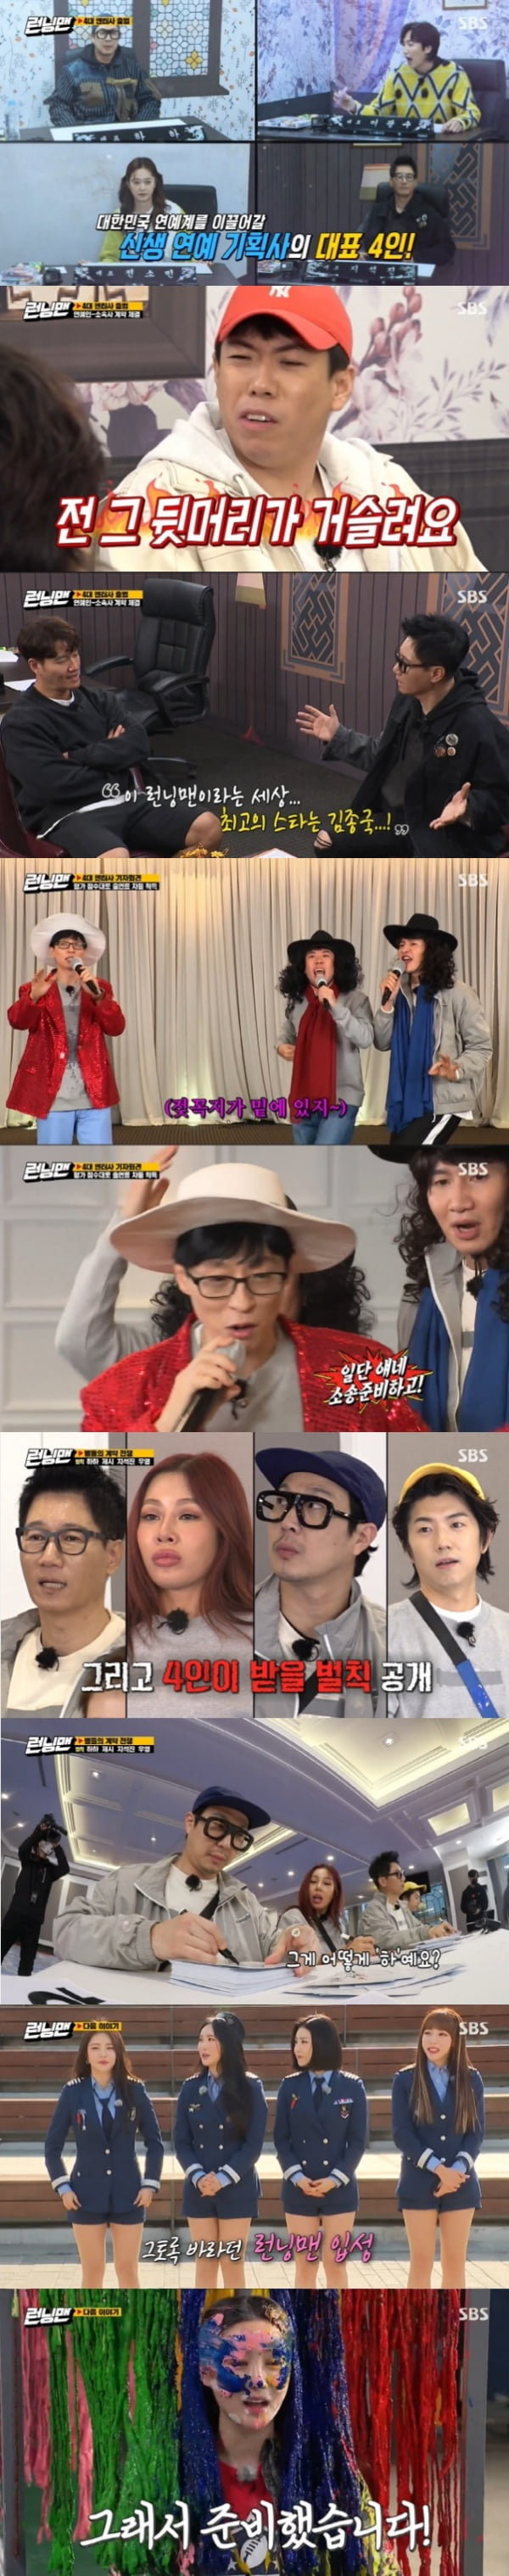 SBS Running Man continued to rise steeply thanks to the members chemistry.Running Man, which aired on the 28th, recorded 3.7% of the 2049 target average audience rating (hereinafter based on Nielsen Korea and households in the metropolitan area), rising for three consecutive weeks and keeping the top spot in the same time zone.The highest audience rating per minute jumped to 8 percent.On this day, Race was decorated with The Contract War of the Stars Race, and singers Jessie and Jung Wooyoung were invited as guests.Haha, Lee Kwang-soo, Ji Suk-jin and Jeon So-min have transformed into entertainment representatives.Representatives had to negotiate revenue distribution with entertainers to succeed in the contract, and a sparkling contract war was held from the beginning.In particular, Lee Kwang-soo surprised everyone by actually cutting his back hair at the end of Yang Se-chan, saying, I will sign if I cut the back.Later, at the time of the renewal, Ji Suk-jins agency was closed down with no contractor, and Ji Suk-jin signed a contract with J Enter (Jeon So-min).The members missed the correct answer by revealing the knowledge base in the next mission, Yaja Golden Bell, and Jessie and Jung Wooyoung were also surprised by the problems of the Russian Presidents full name and the Argentine capital.As a result of the last mission, Running Entertainment Hall, Jeon So-min ranked first among the three representatives and Song Ji-hyo ranked first in entertainers.The scene was the highest audience rating of 8% per minute, with Jung Wooyoung, Jessie and Ji Suk-jin being penalized.Four people, including the representative Haha, signed 100 autographs with penalties.On the other hand, the Running Man, which will be broadcast on the 4th of next month, will be launched by the Reverse Icon Brave Girls, and will perform Brave Idol Day Race.a fairy tale that children and adults hear togetherstar behind photoℑat the same time as the latest issue